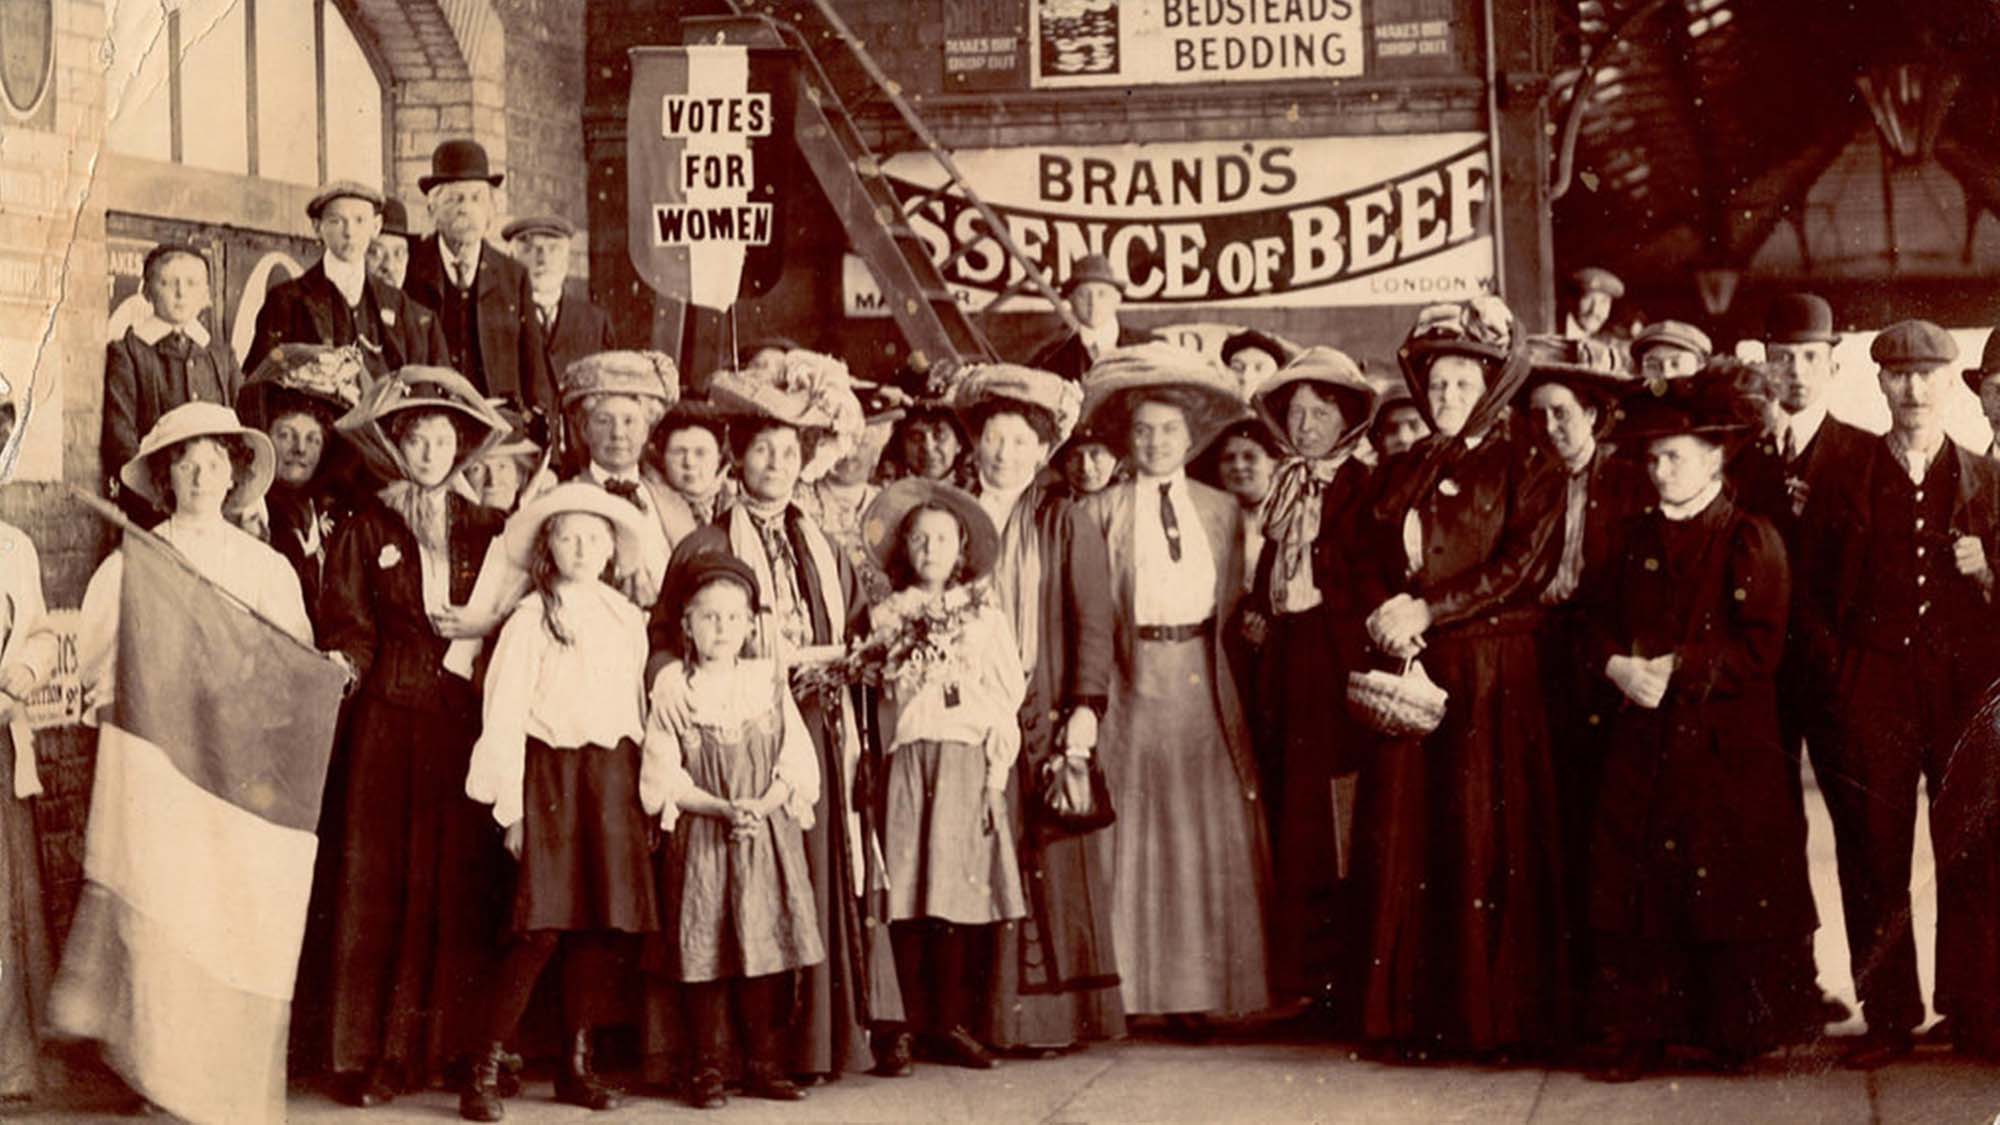 Votes for Women campaigners, 1909